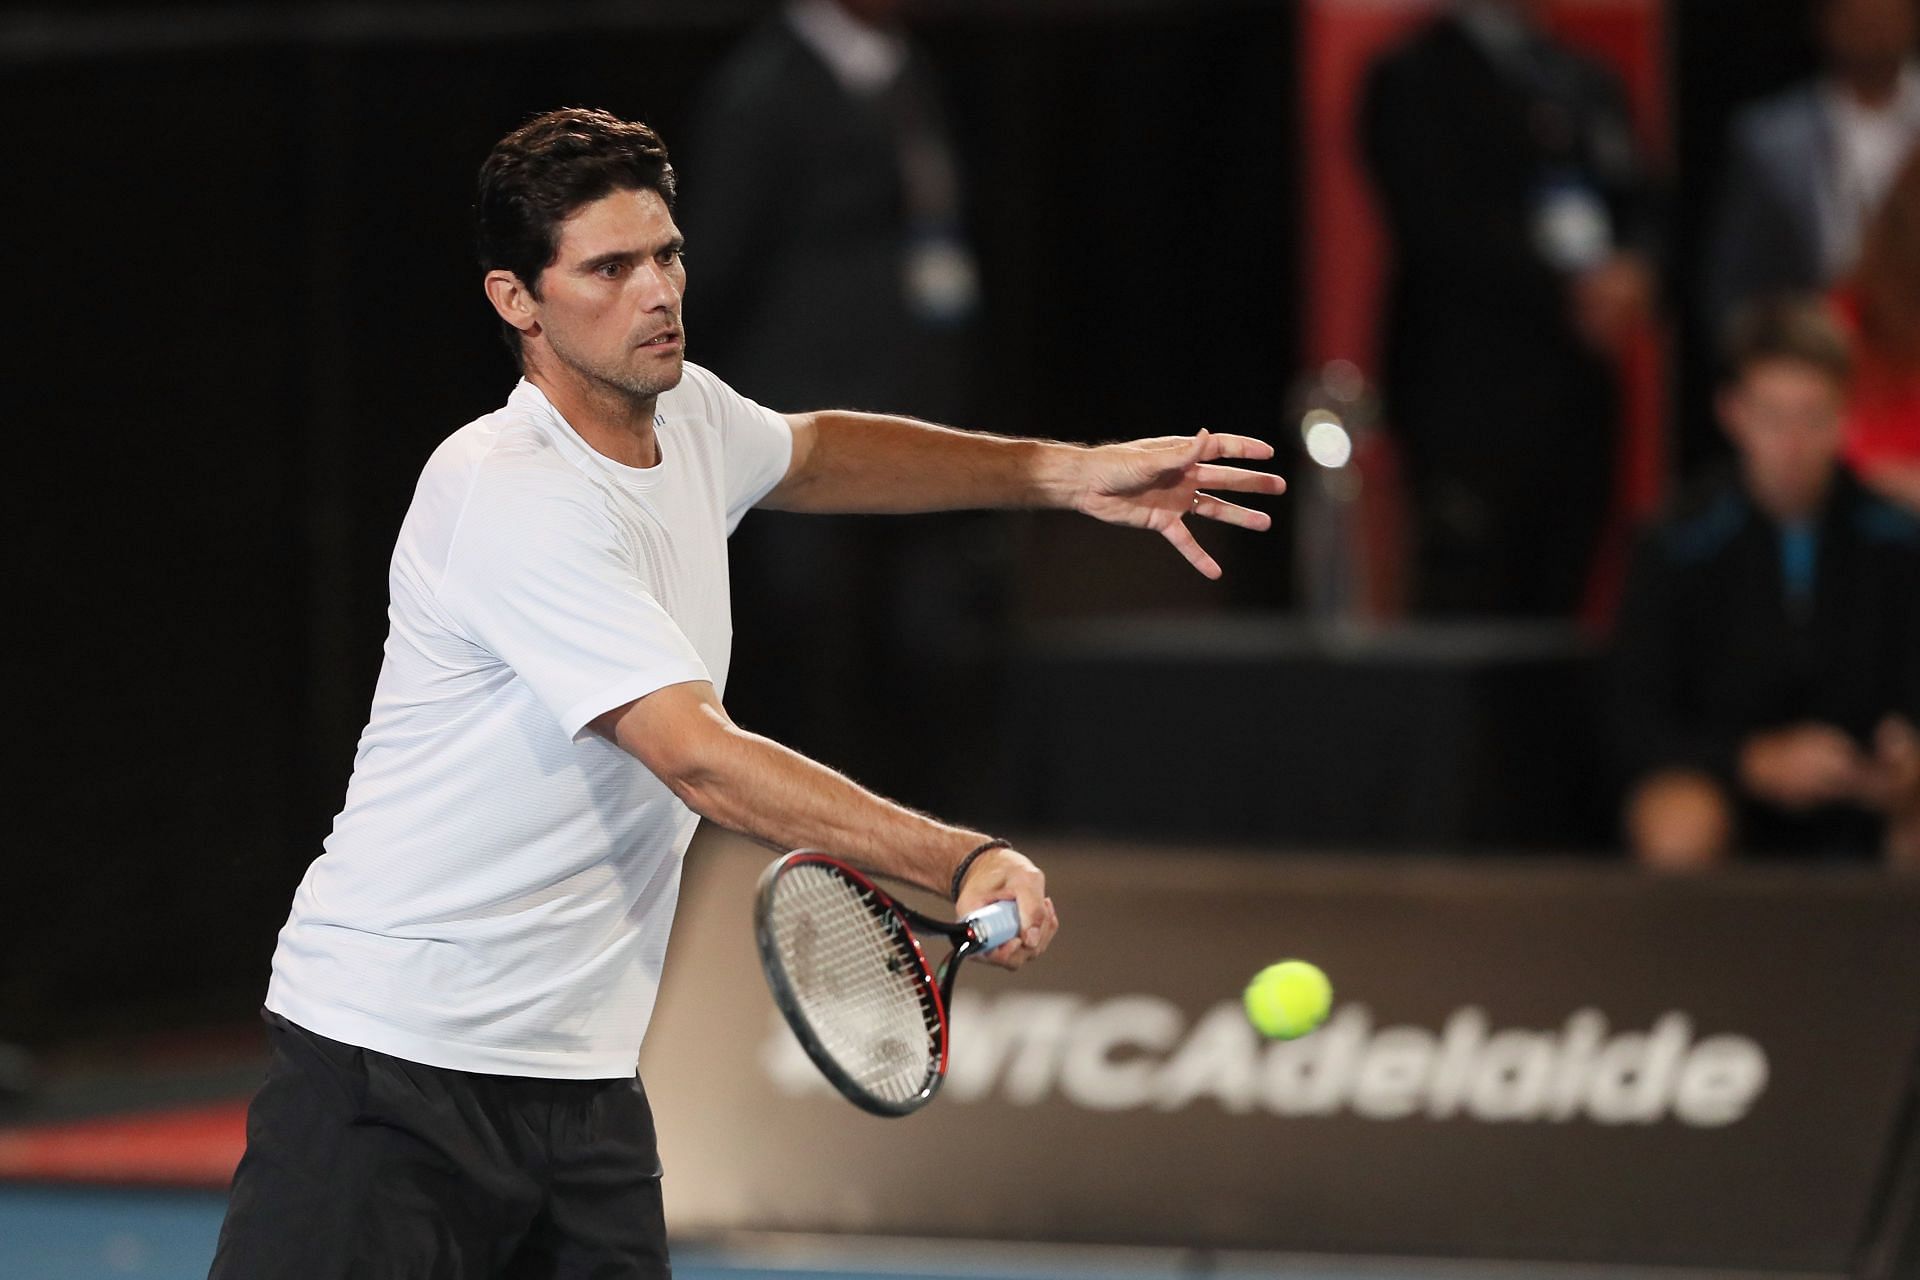 Mark Philippoussis was recently found in violation of tennis betting sponsorships rules.